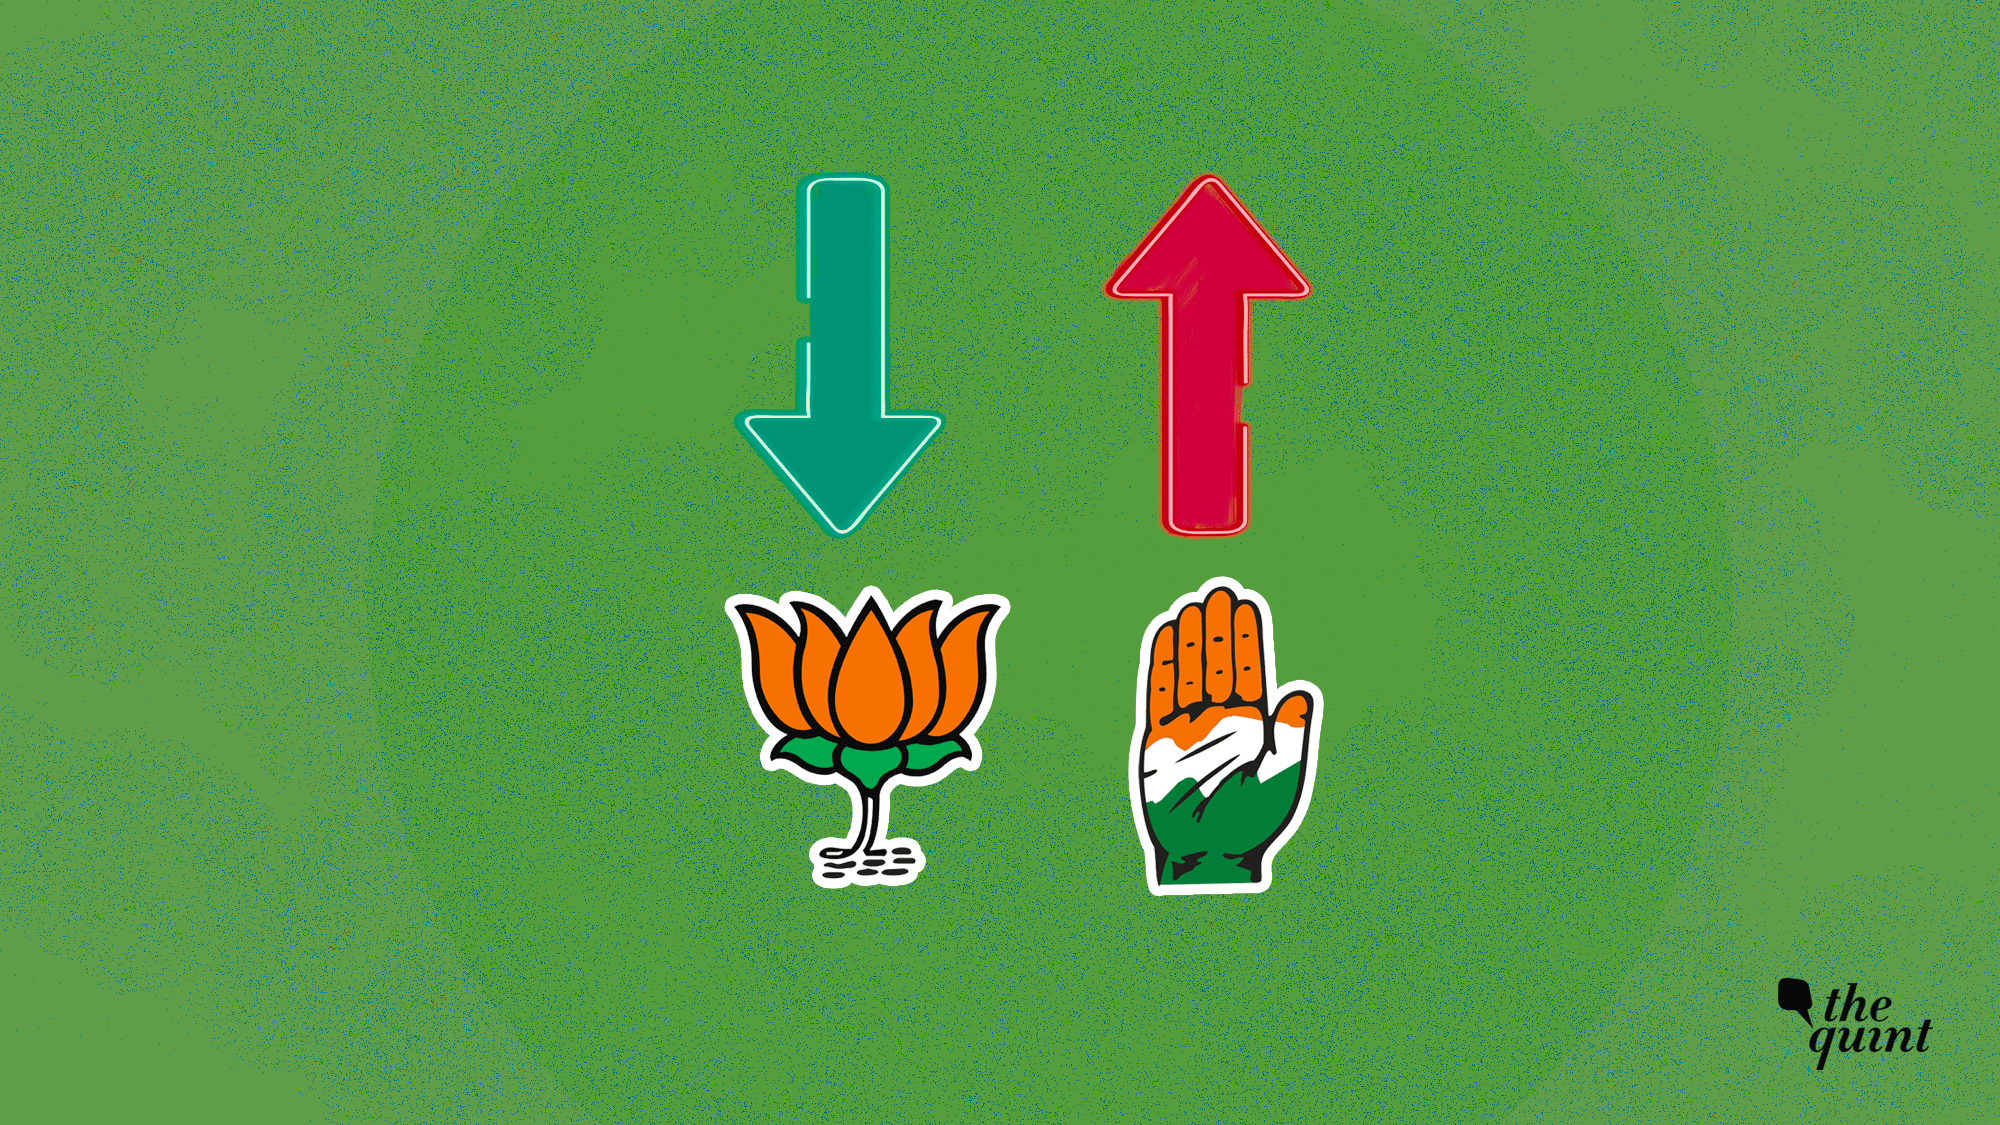 Catch all the updates on who’s leading and who’s trailing in Lok Sabha elections 2019.